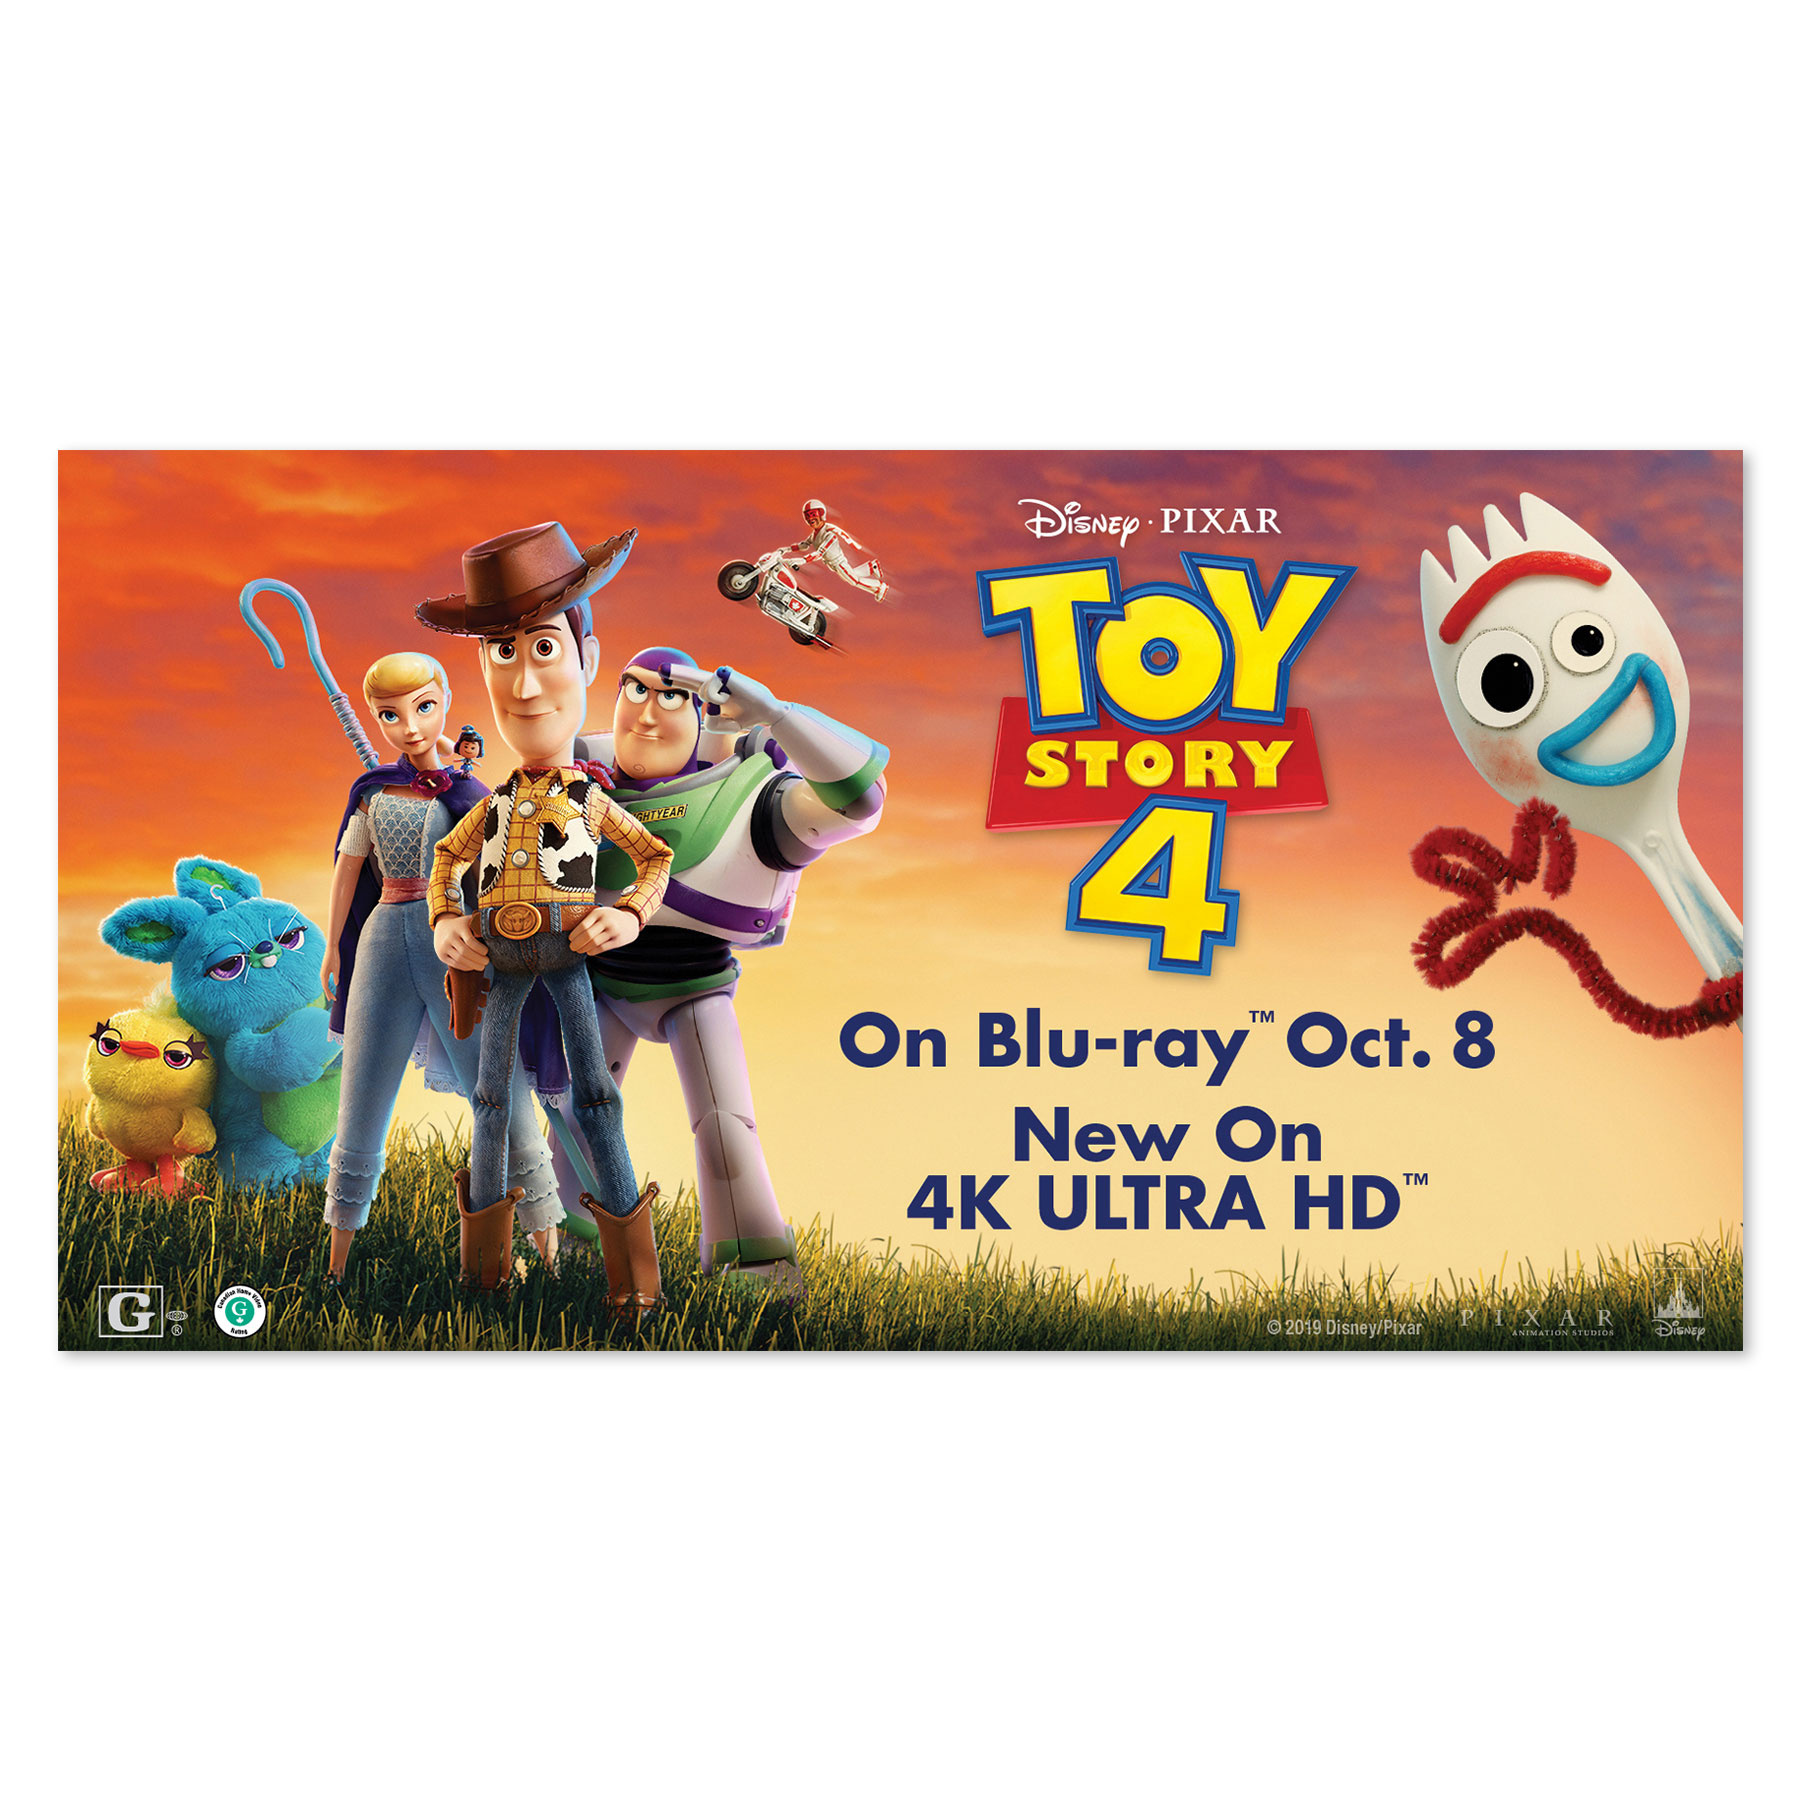 Toy Story 4 TV Screen Graphic